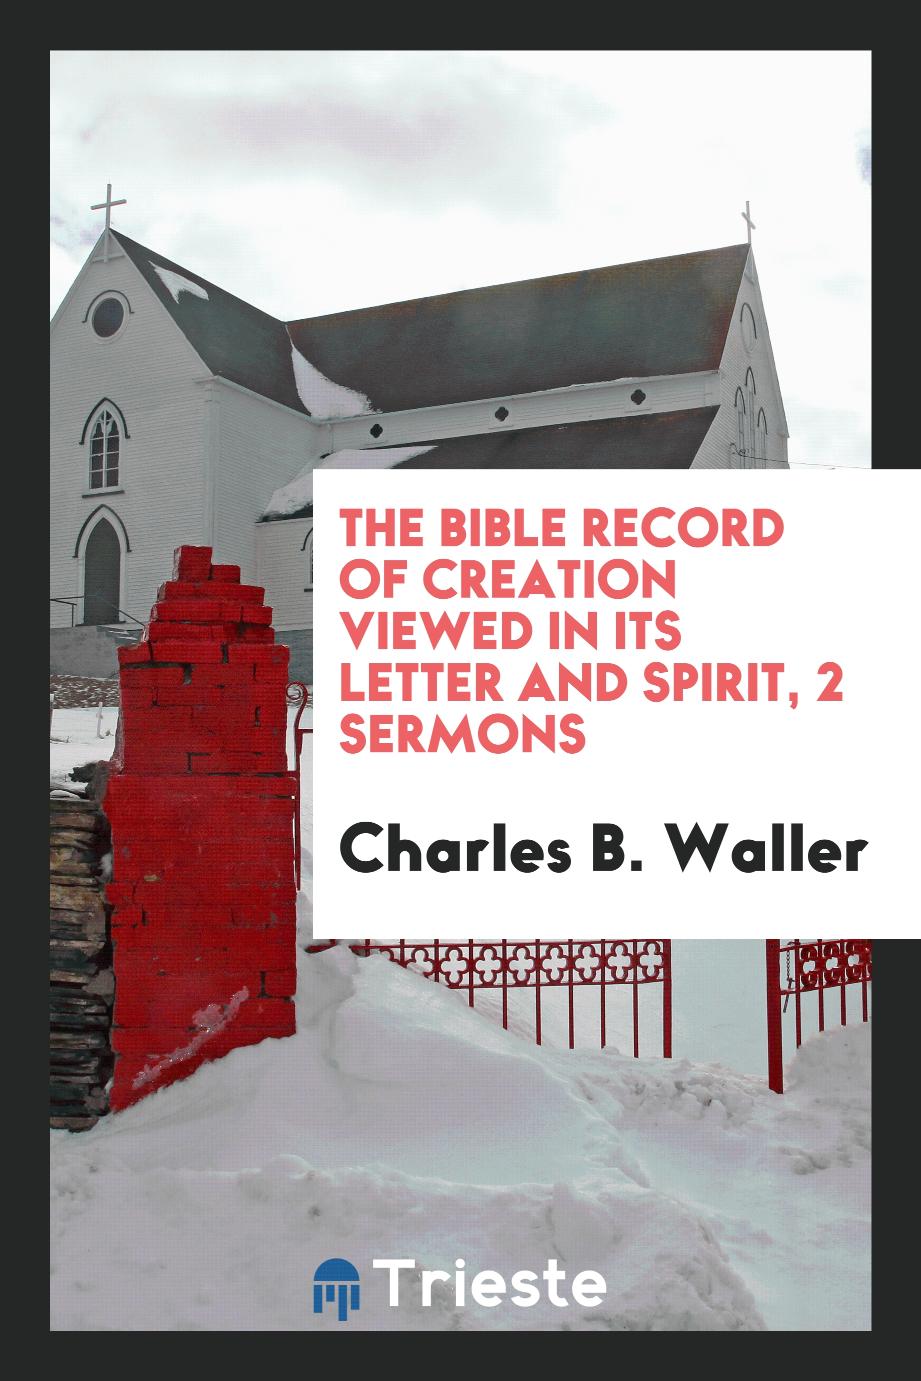 The Bible record of Creation viewed in its letter and spirit, 2 sermons